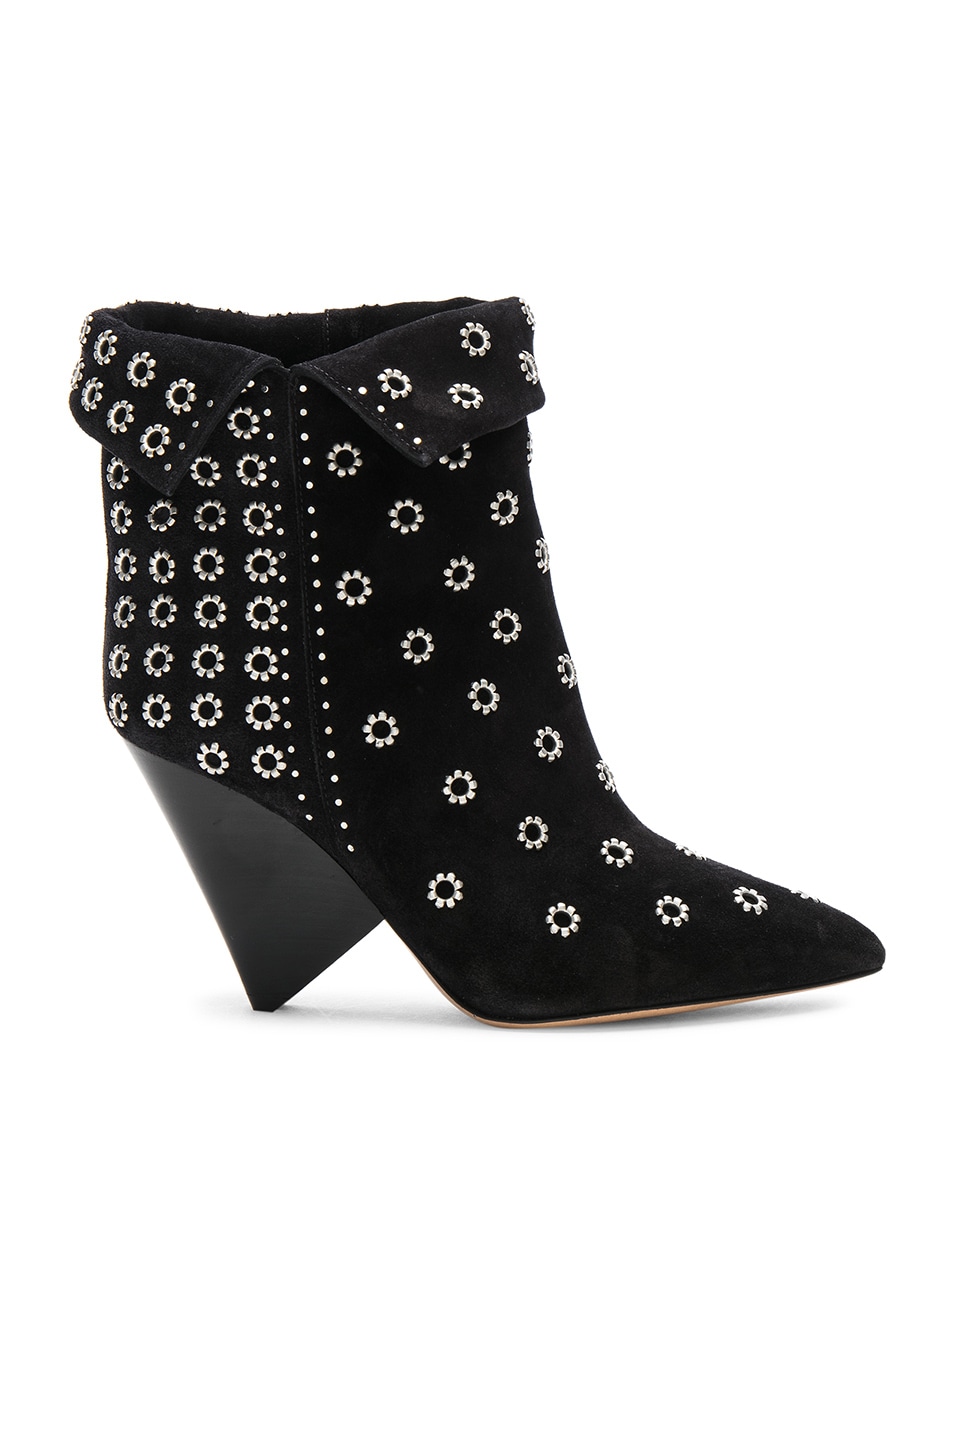 Image 1 of Isabel Marant Studded Suede Lakky Ankle Boots in Black